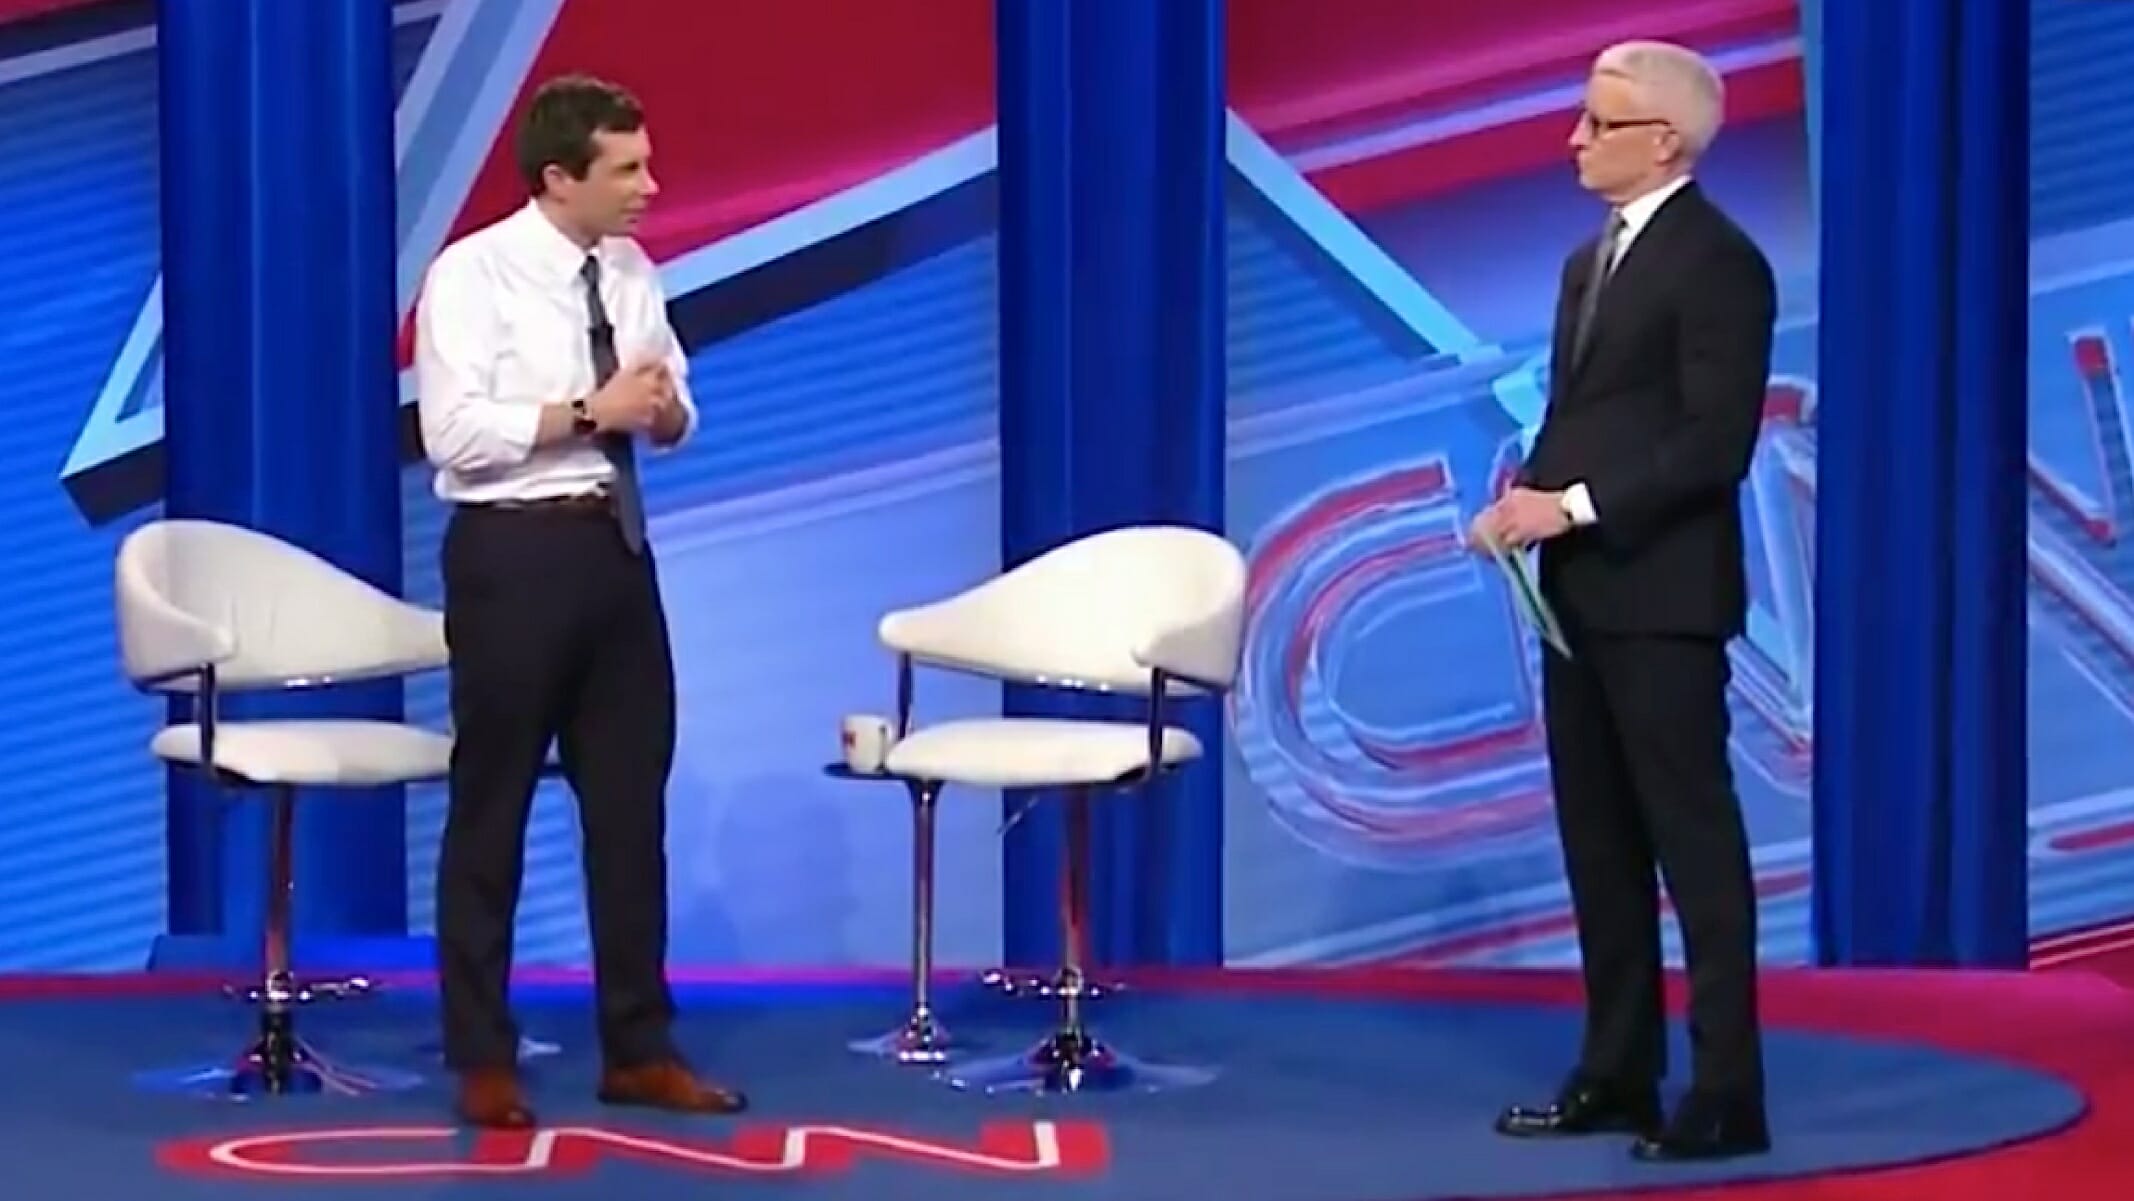 This Embarrassing Exchange Tells You Everything You Need to Know About Pete Buttigieg